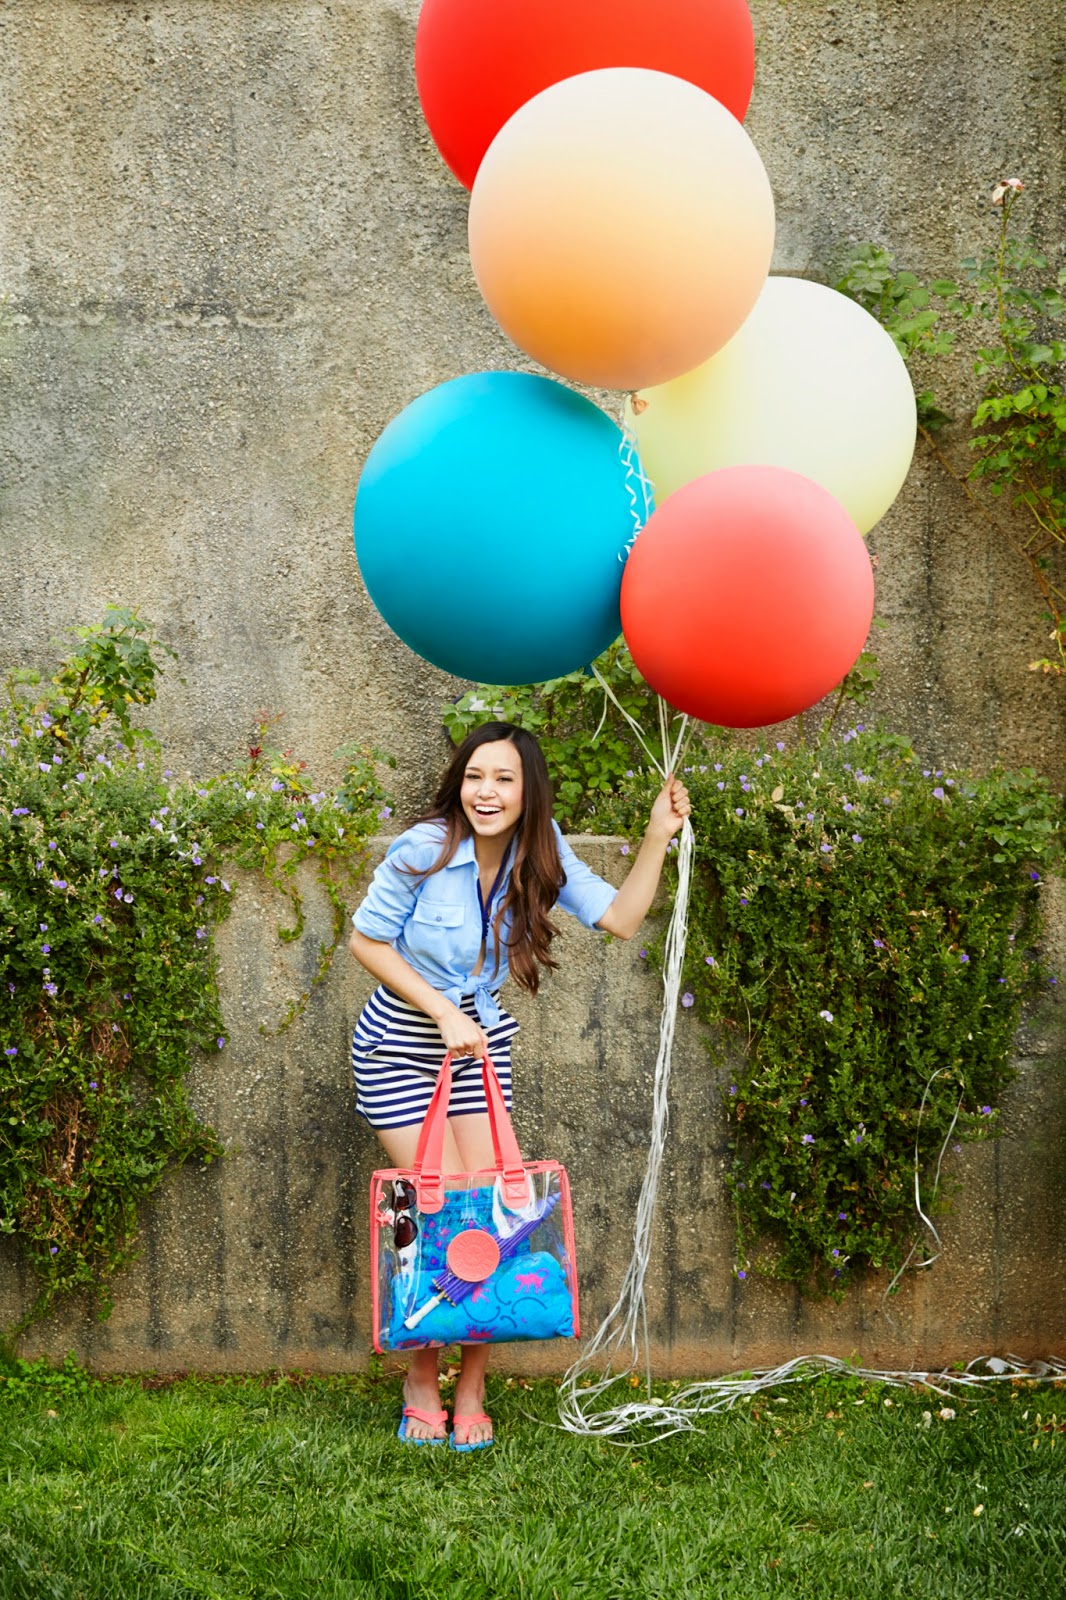 Kipling Launches #Back2Kipling Campaign with Megan Nicole